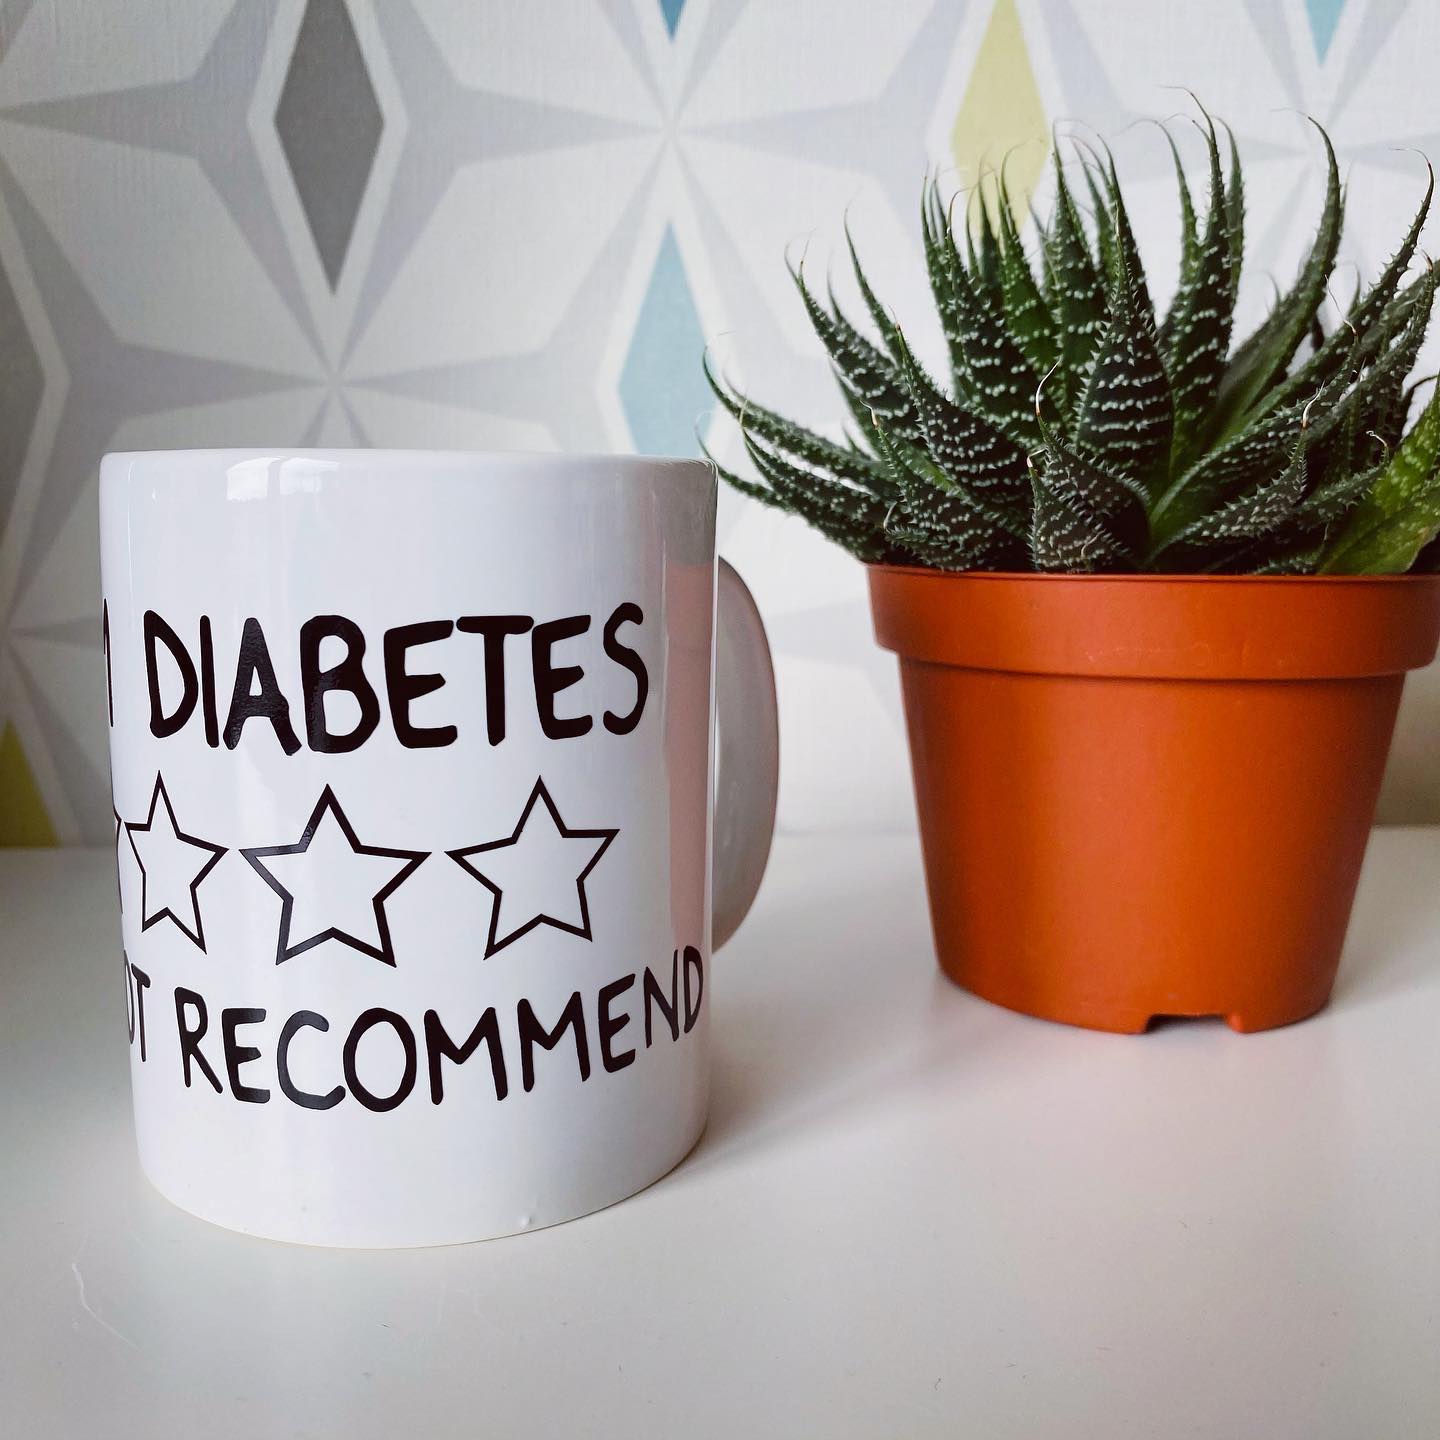 Type 1 Diabetes - Would Not Recommend Mug/Cup